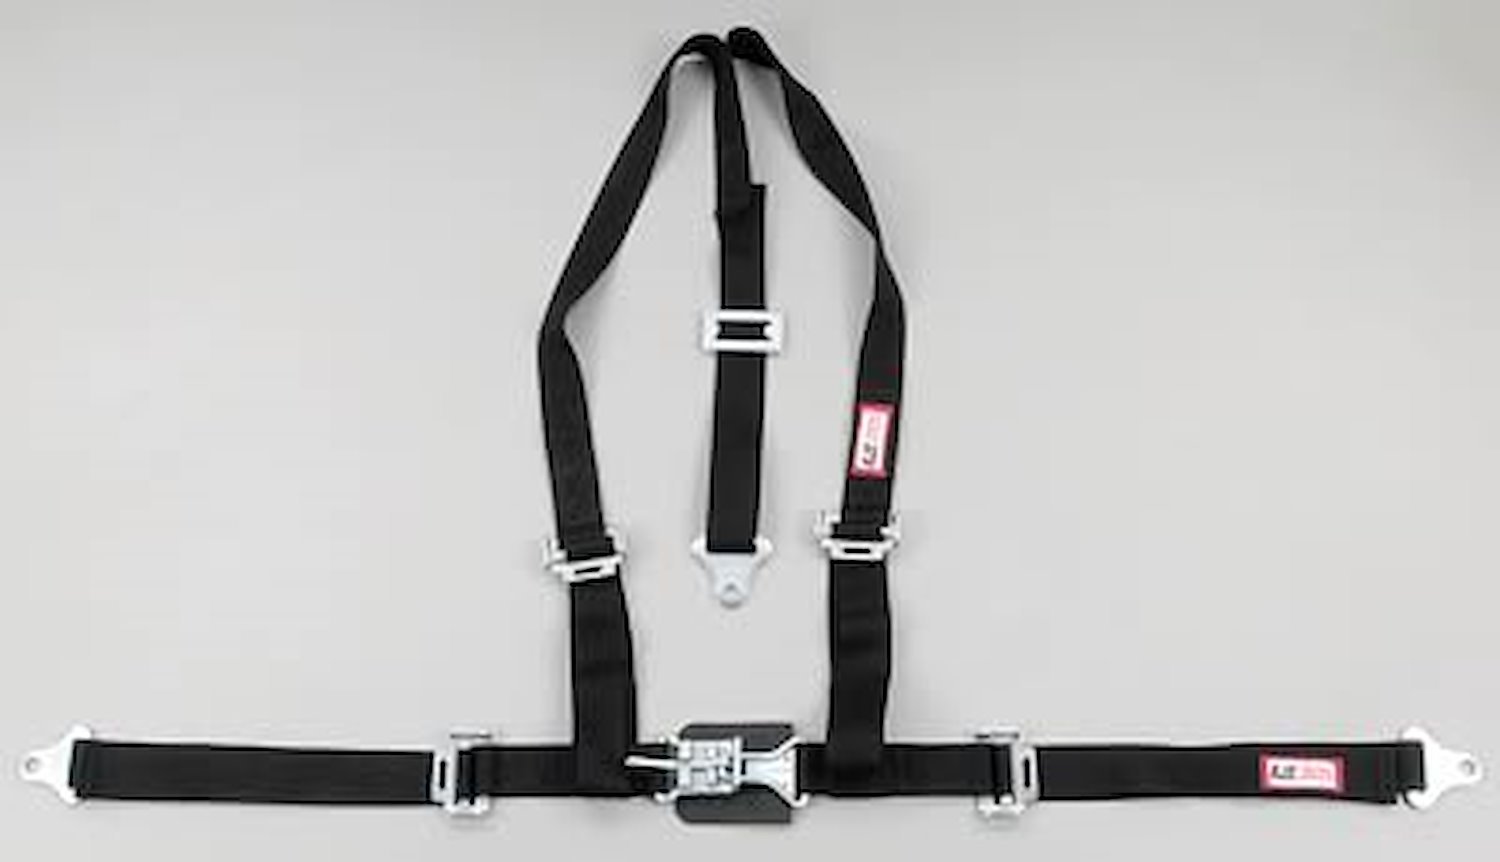 NON-SFI L&L HARNESS 3 PULL UP Lap Belt SNAP SEWN IN 2 S.H. Individual FLOOR Mount w/STERNUM STRAP WRAP/SNAP ORANGE